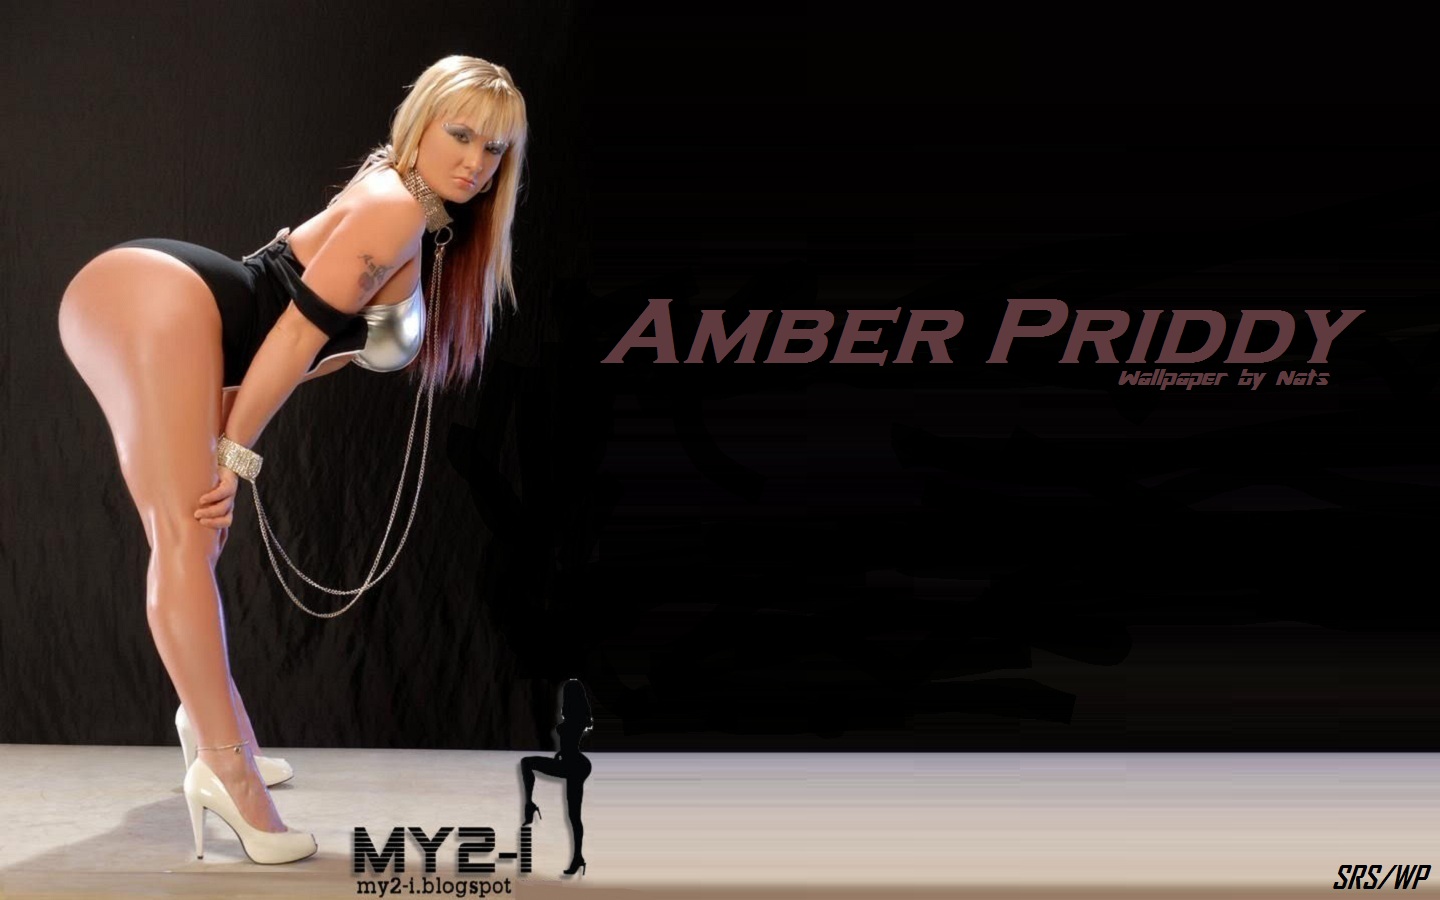 Download full size Amber Priddy wallpaper / Celebrities Female / 1440x900